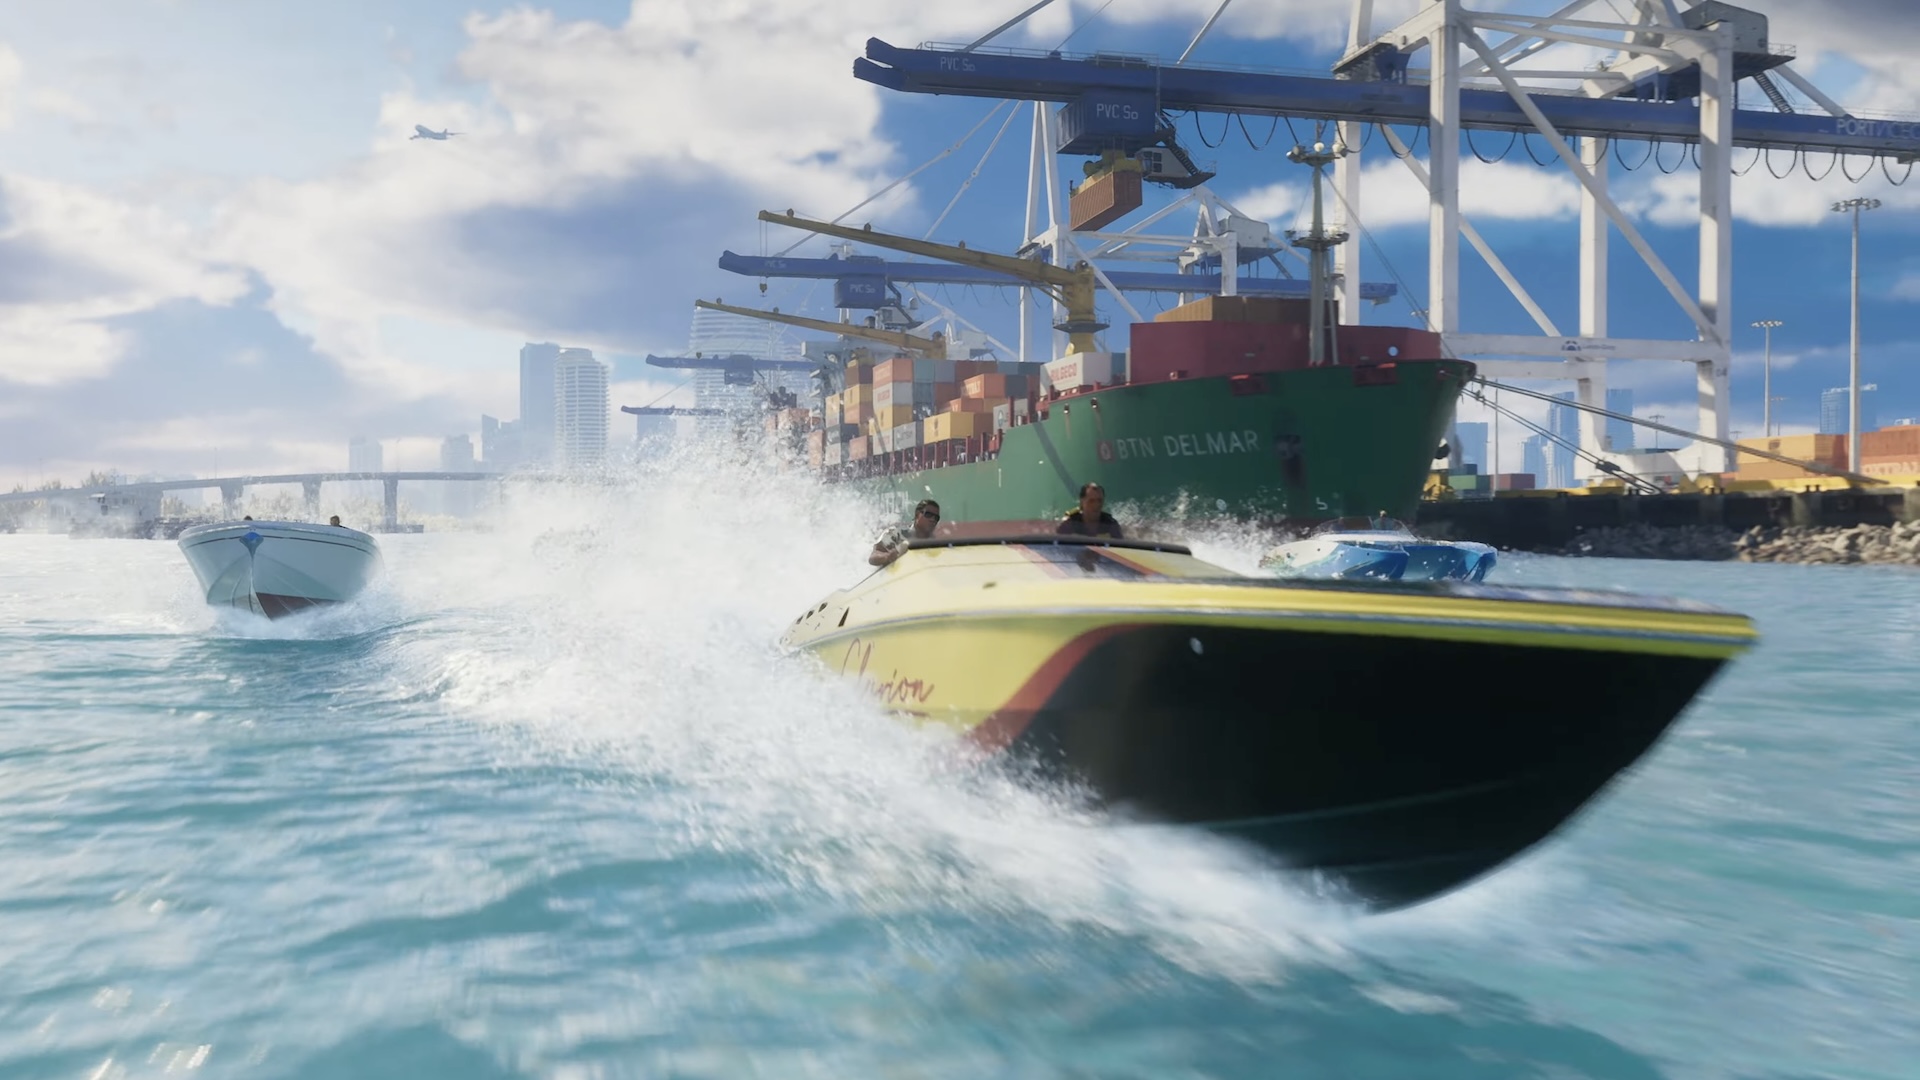 GTA 6 will launch late in 2025 according to Take-Two financial report